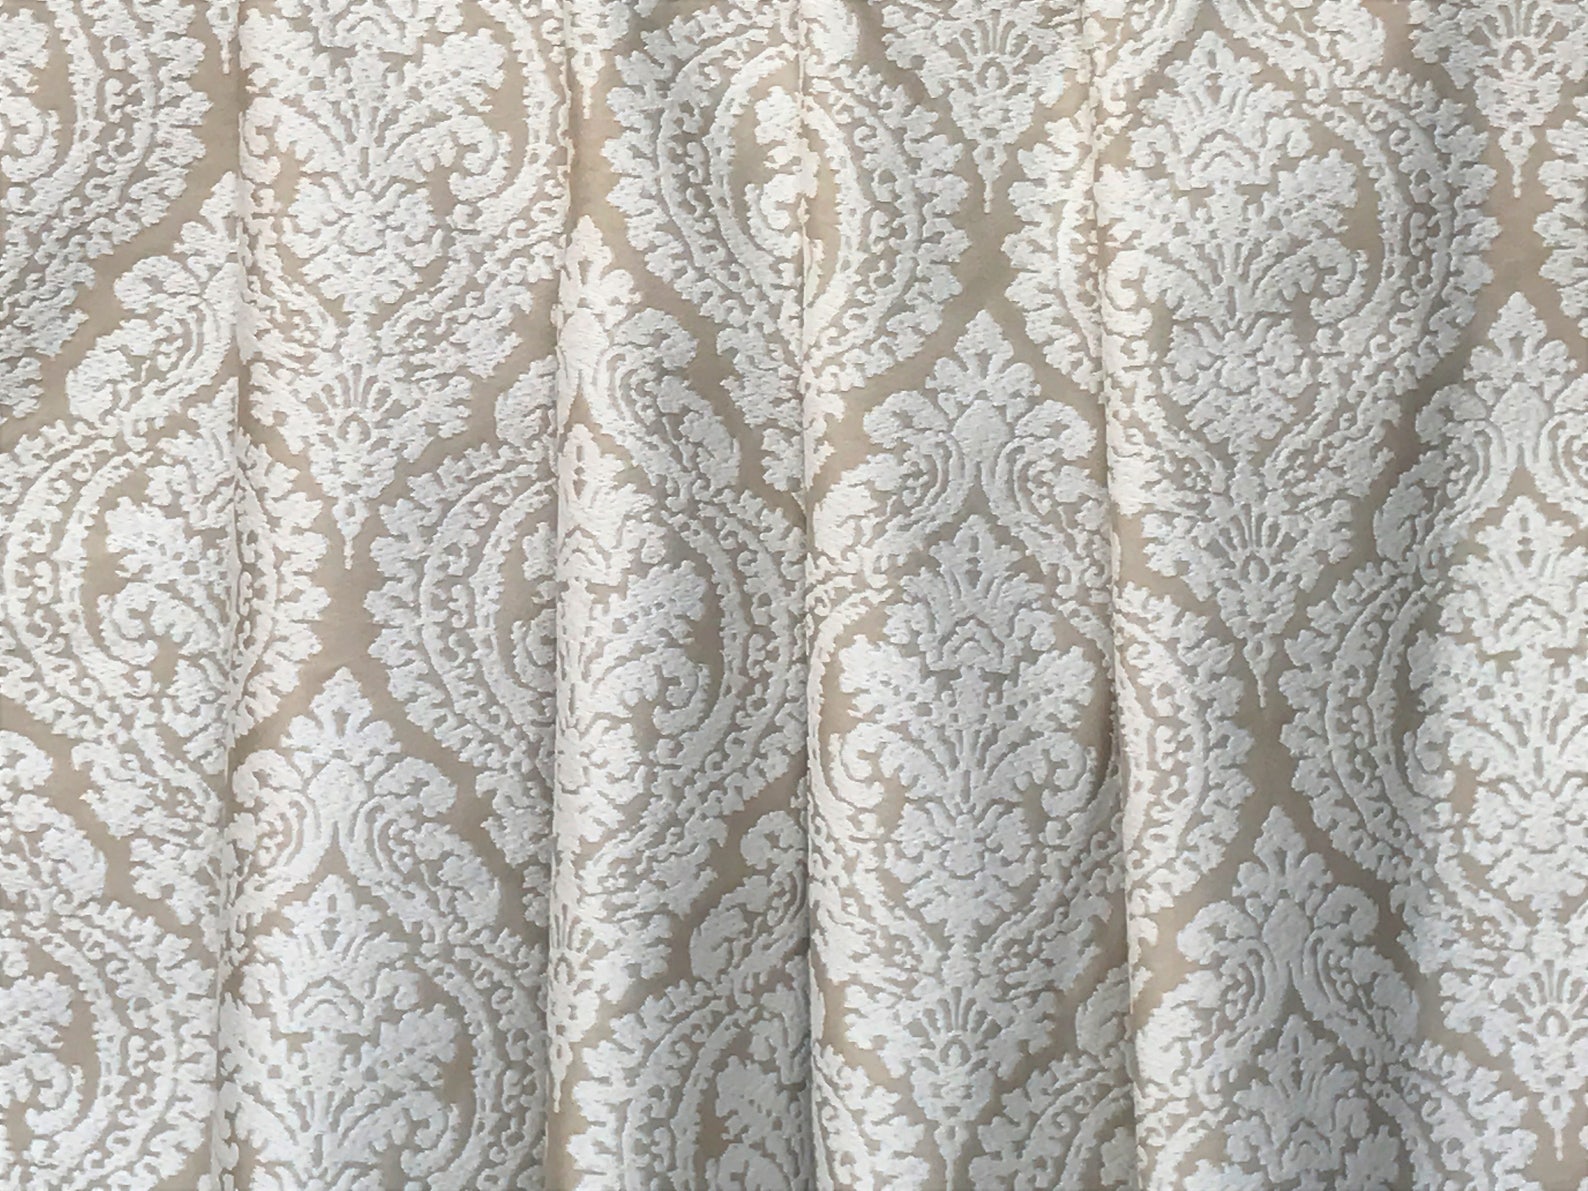 Champagne and Ivory Damask Curtain Fabric by the Yard - Etsy